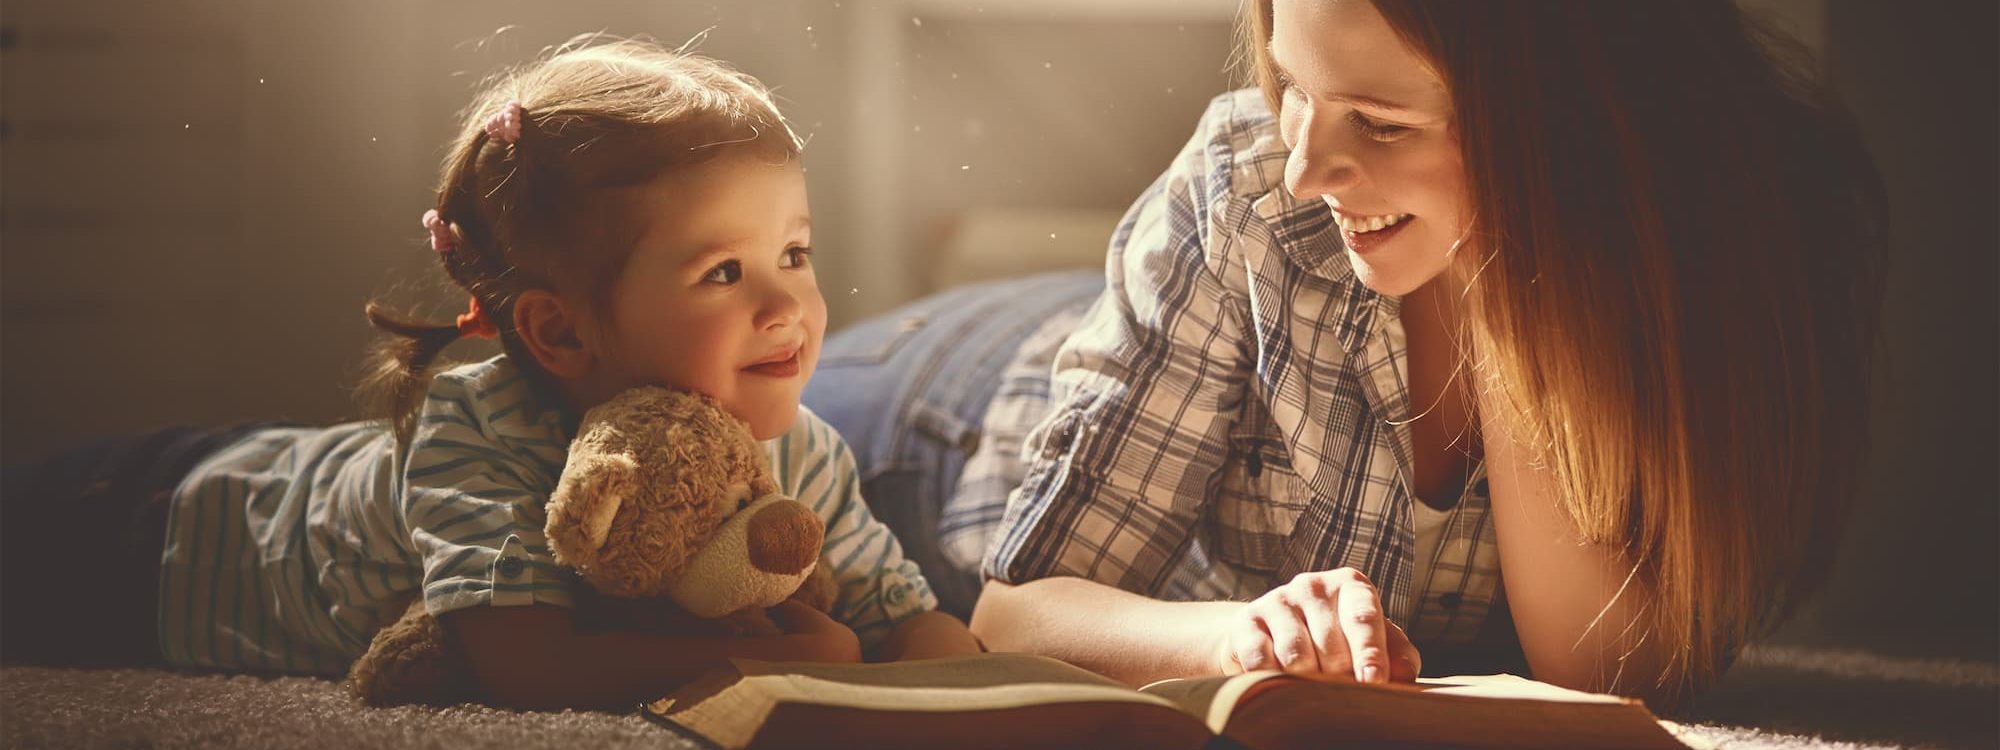 Child reading book with woman and teddy bear